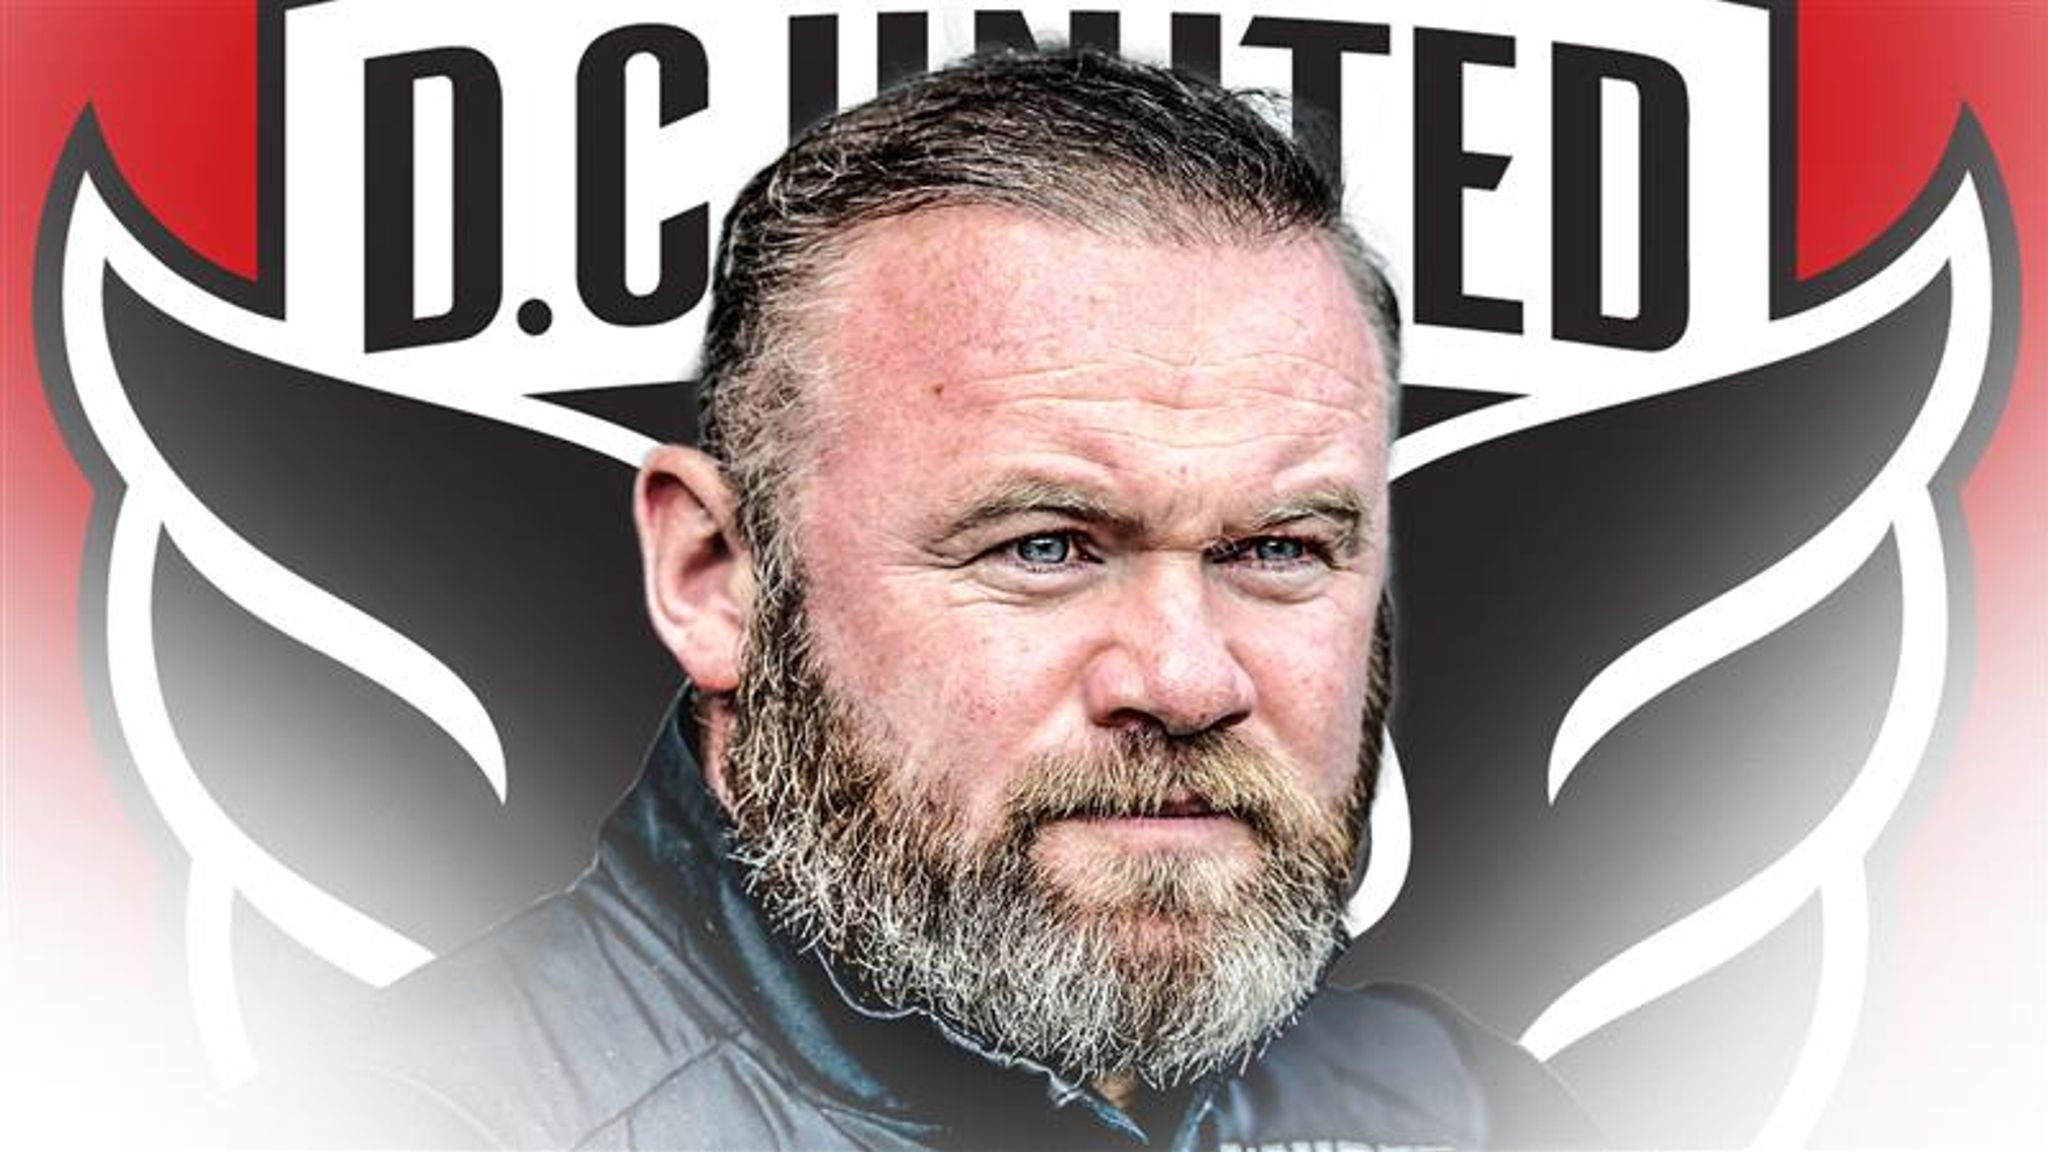 Wayne's World: DC United formally introduces Rooney - WTOP News